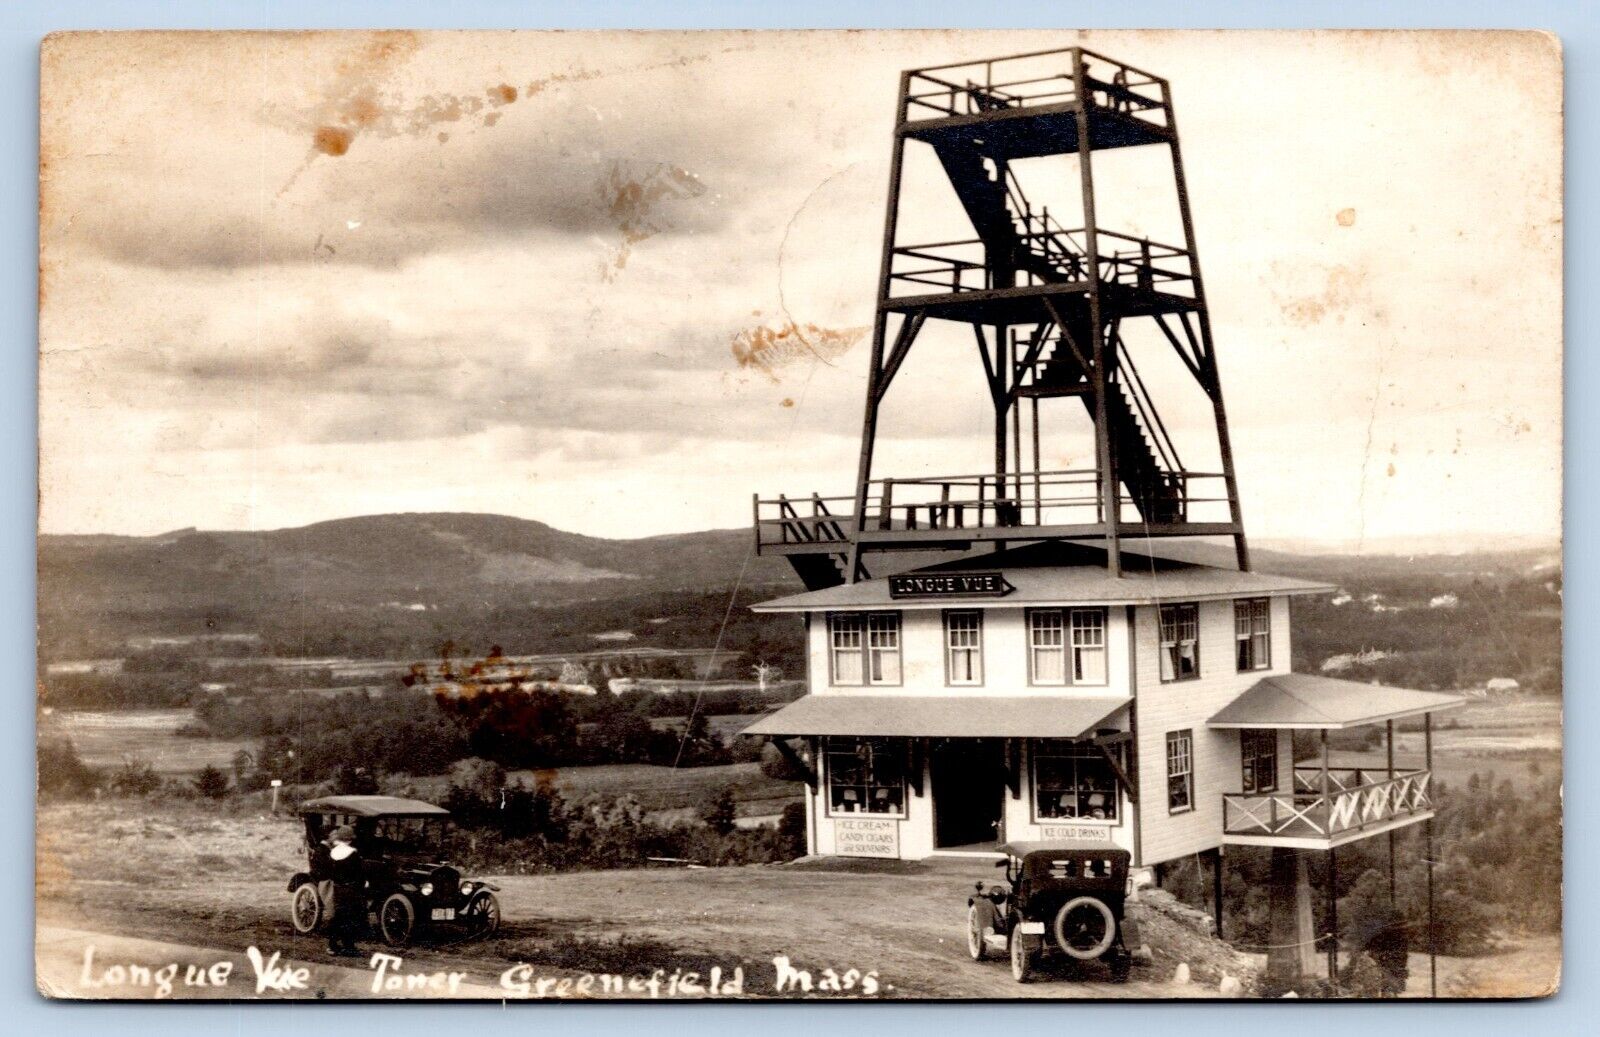 1923 RPPC GREENFIELD MASS LONGUE VUE TOWER long view gifts souvenirs ice cream